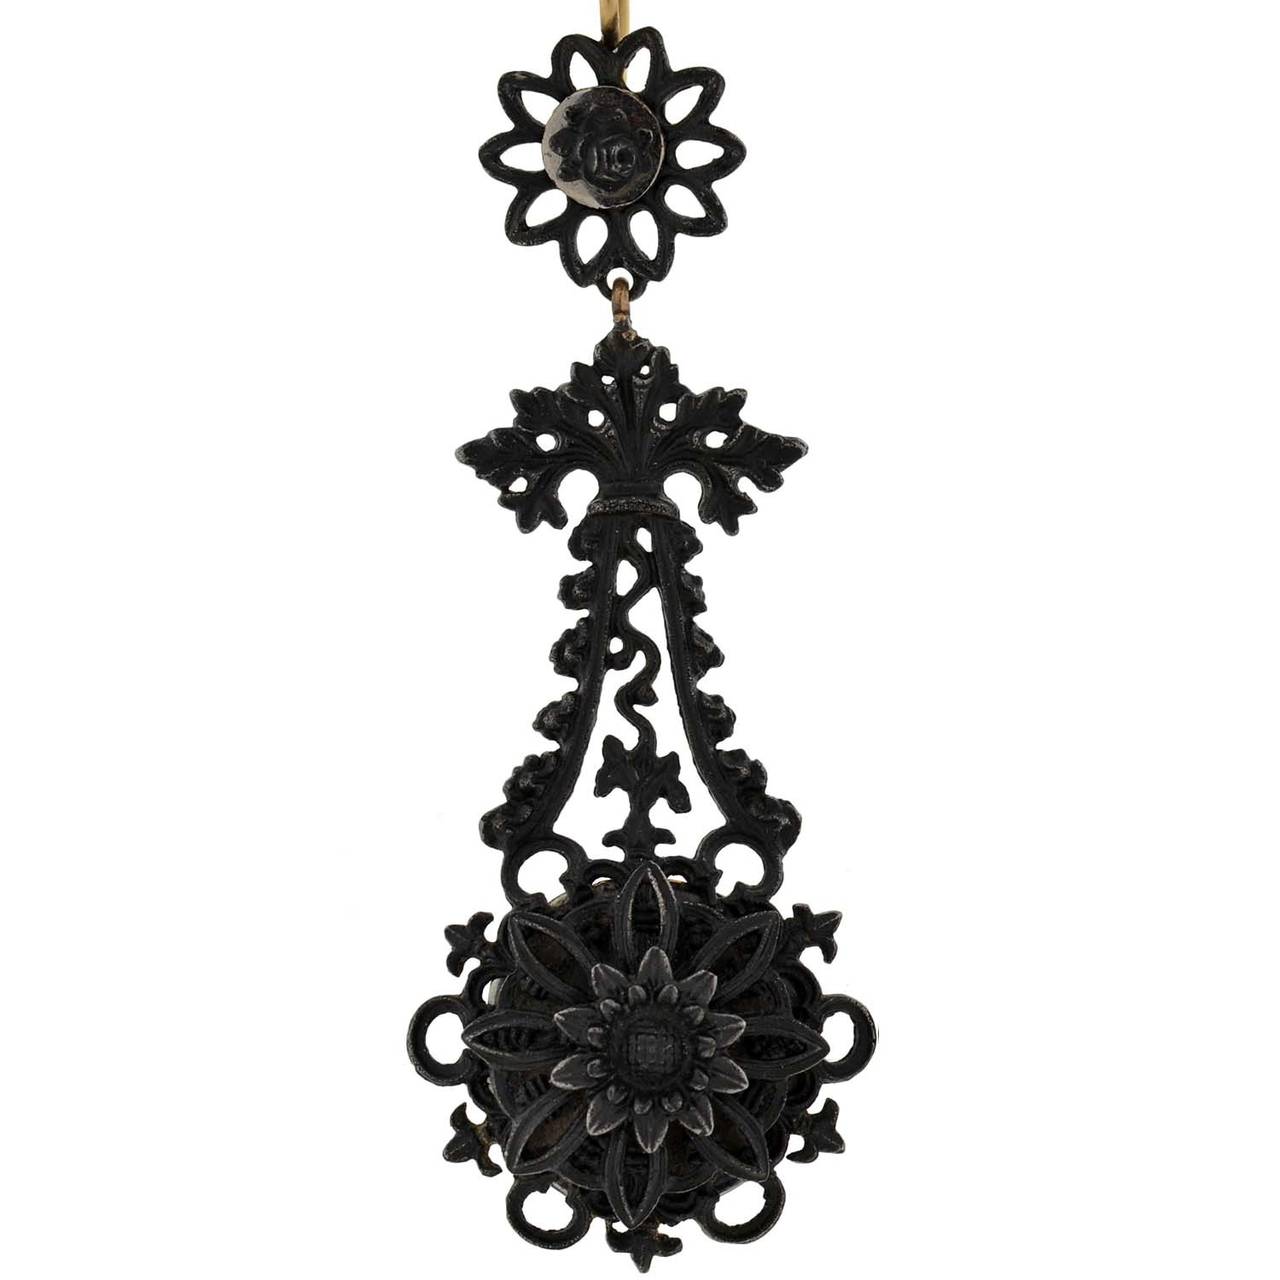 Berlin iron jewelry was produced in Germany by the Berlin Royal Foundry beginning in 1804. Previously, iron jewelry had primarily been worn in periods of mourning due to its dark color. However, it reached a high point of popularity between 1813 and